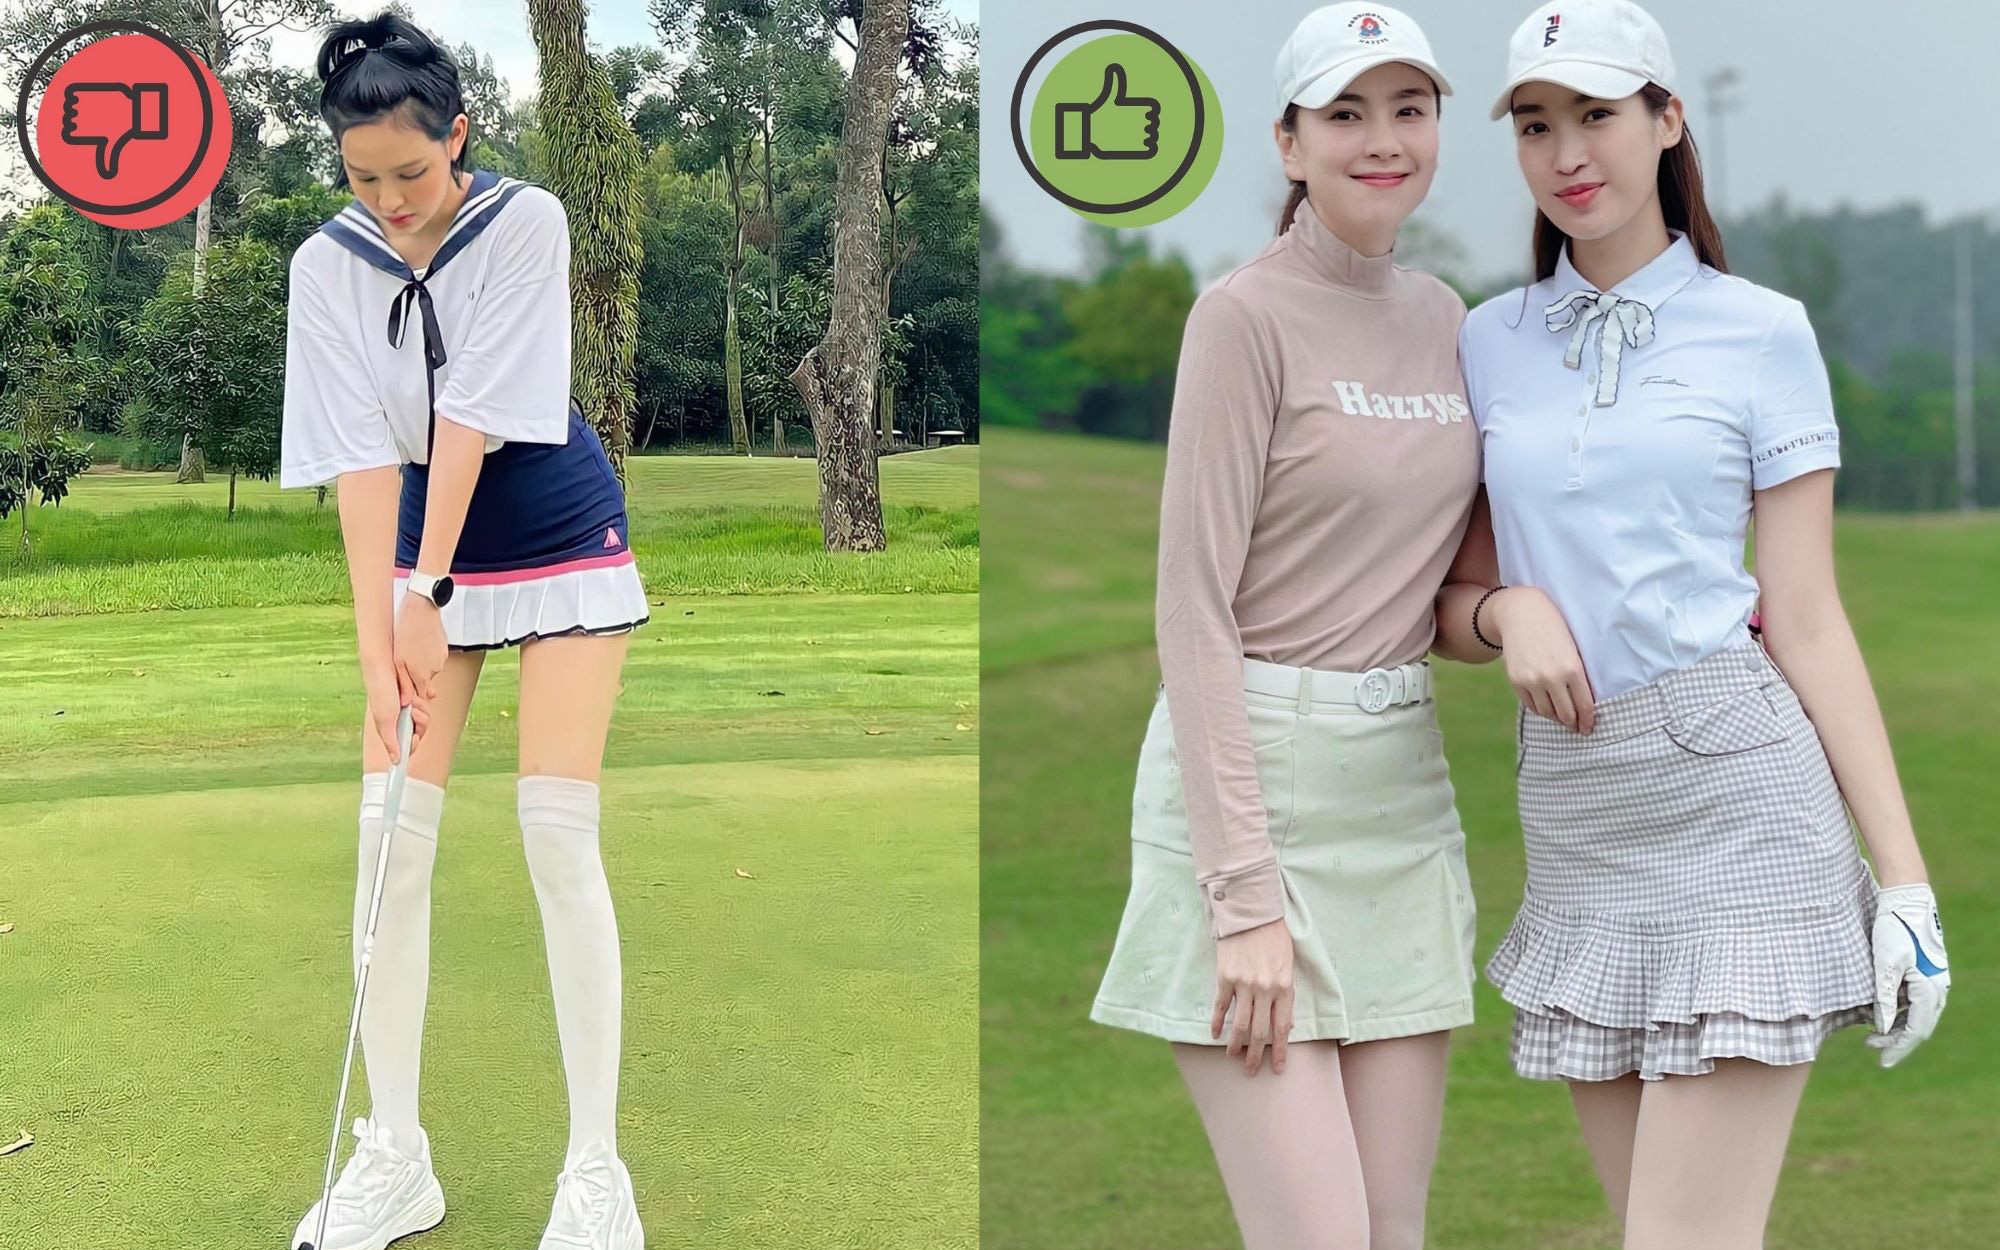 8 outings are 8 sets of uniforms, does Hien Ho really play golf seriously?